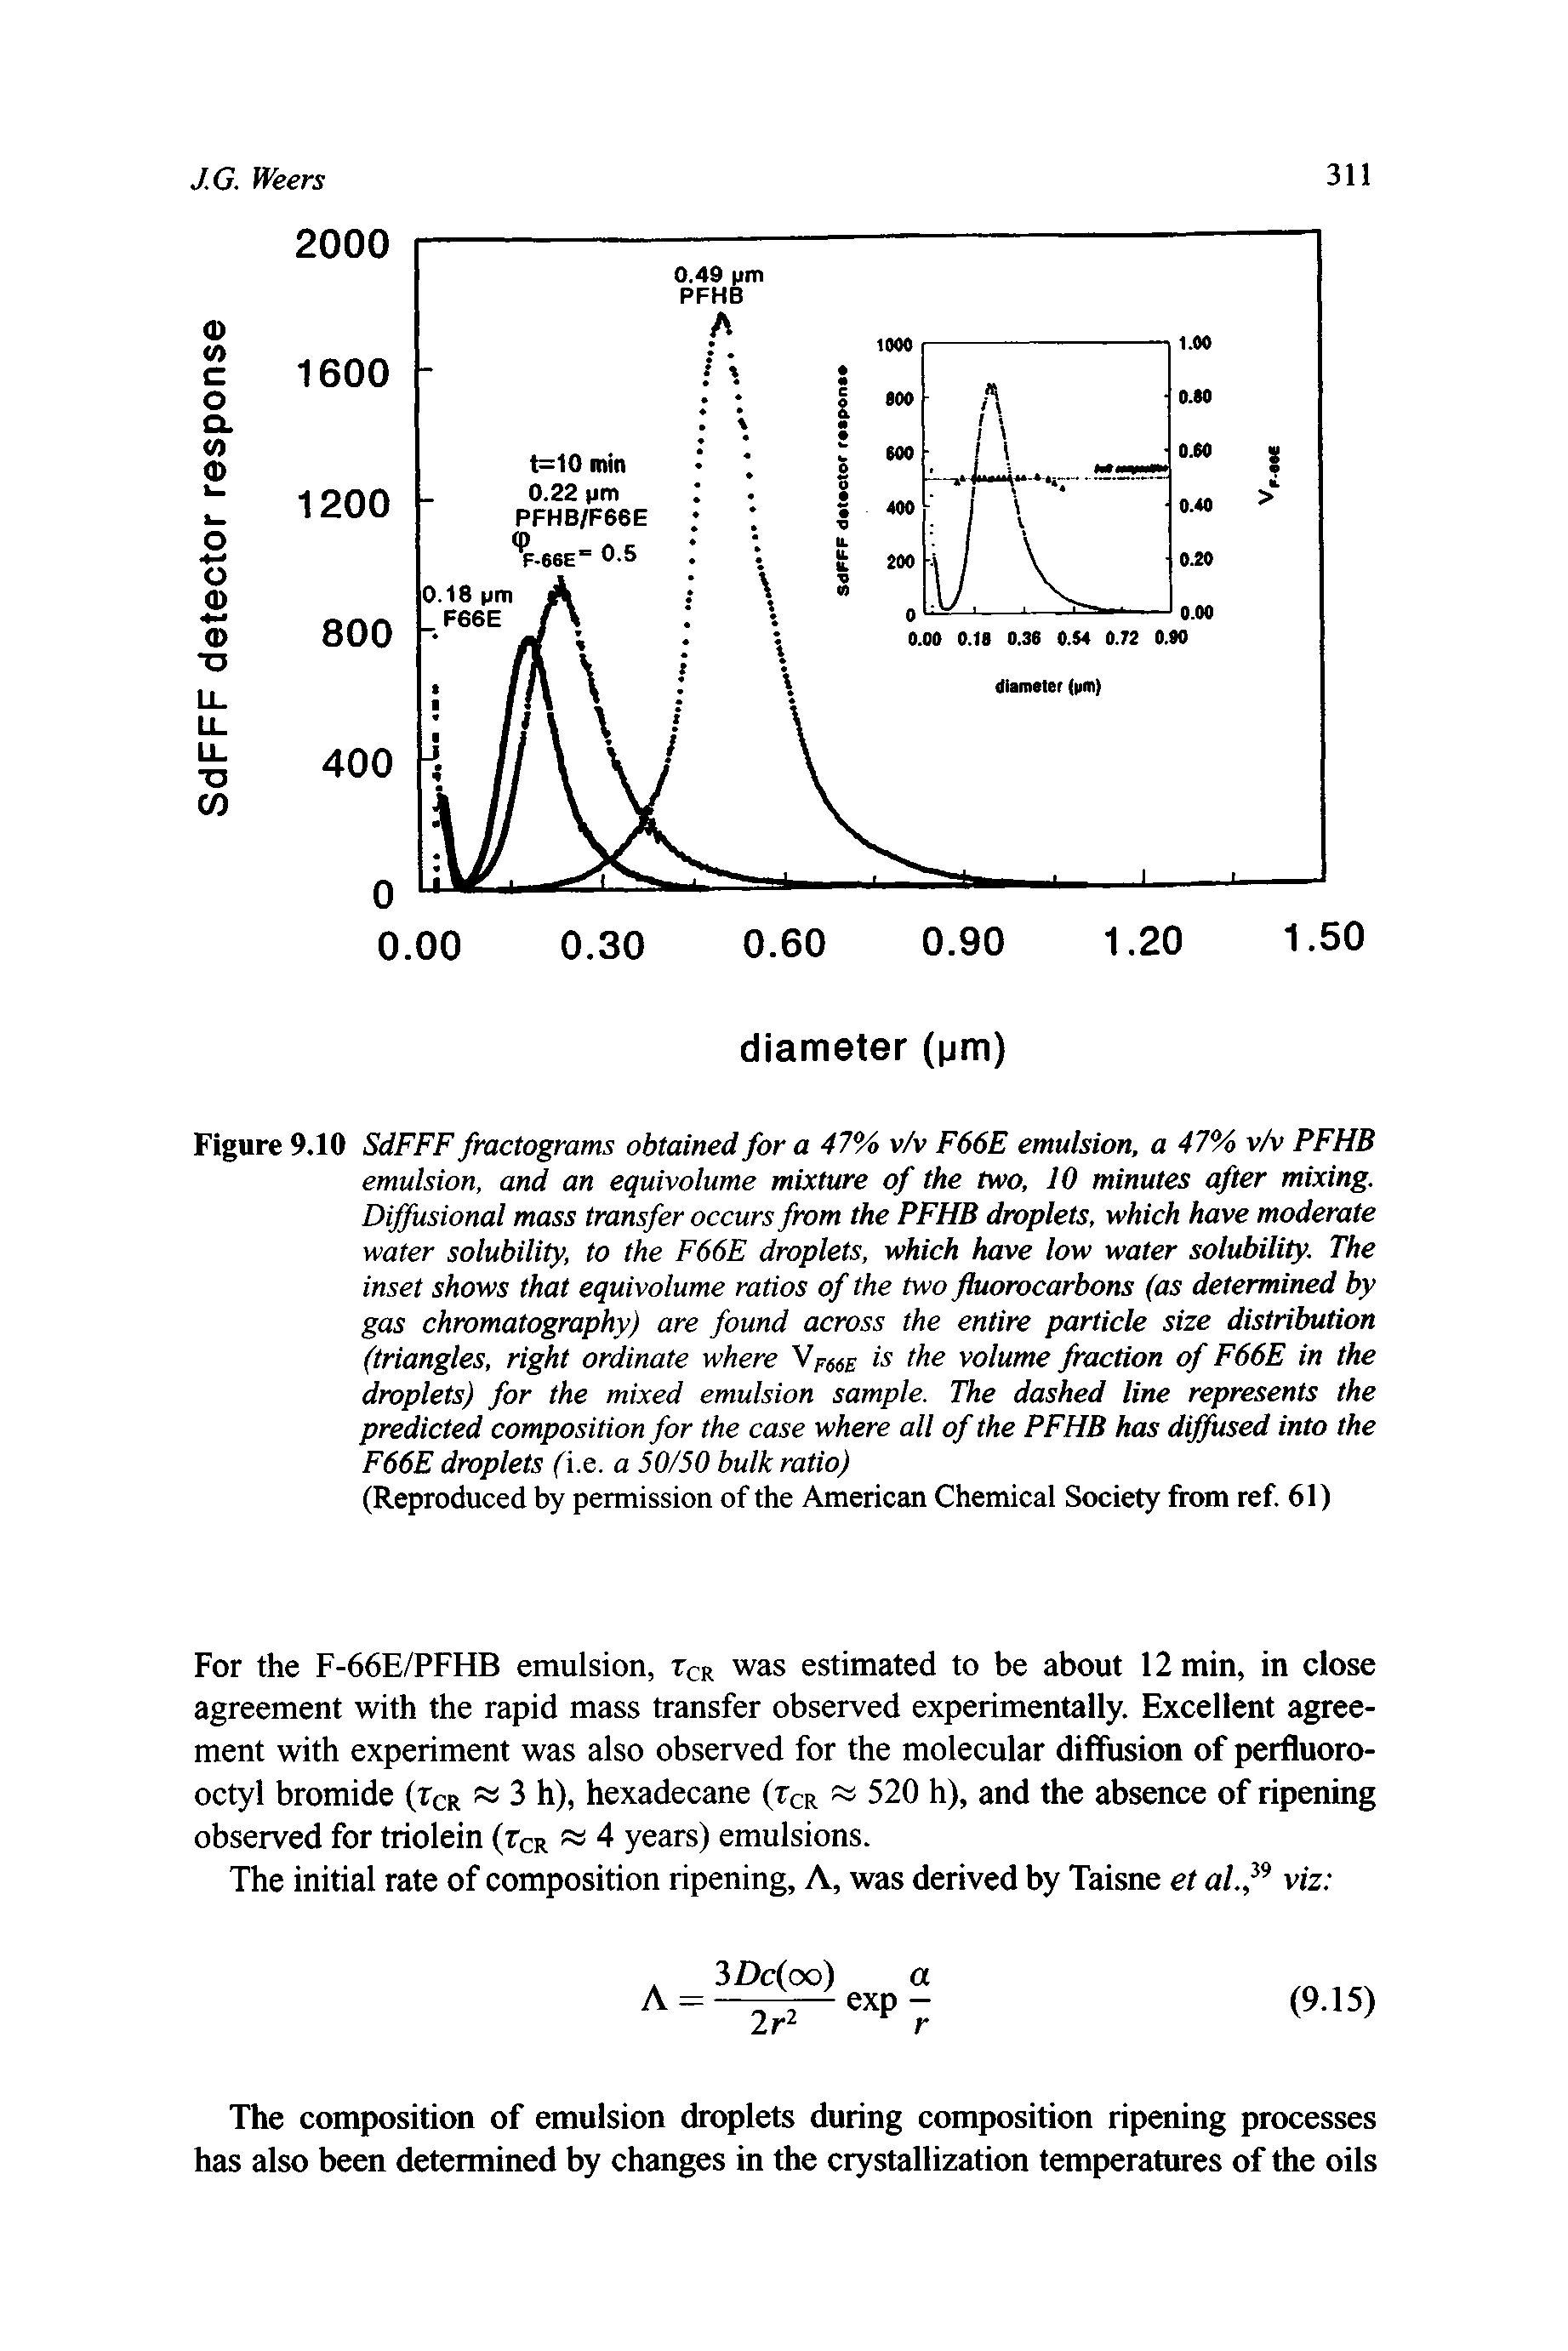 Figure 9.10 SdFFF fractogmms obtained for a 47% v/v F66E emulsion, a 47% v/v PFHB emulsion, and an equivolume mixture of the two, 10 minutes after mixing. Diffusional mass transfer occurs from the PFHB droplets, which have moderate water solubility, to the F66E droplets, which have low water solubility. The inset shows that equivolume ratios of the two fluorocarbons (as determined by gas chromatography) are found across the entire particle size distribution (triangles, right ordinate where Vf66e volume fraction of F66E in the droplets) for the mixed emulsion sample. The dashed line represents the predicted composition for the case where all of the PFHB has diffused into the F66E droplets (i.e. a 50/50 bulk ratio)...